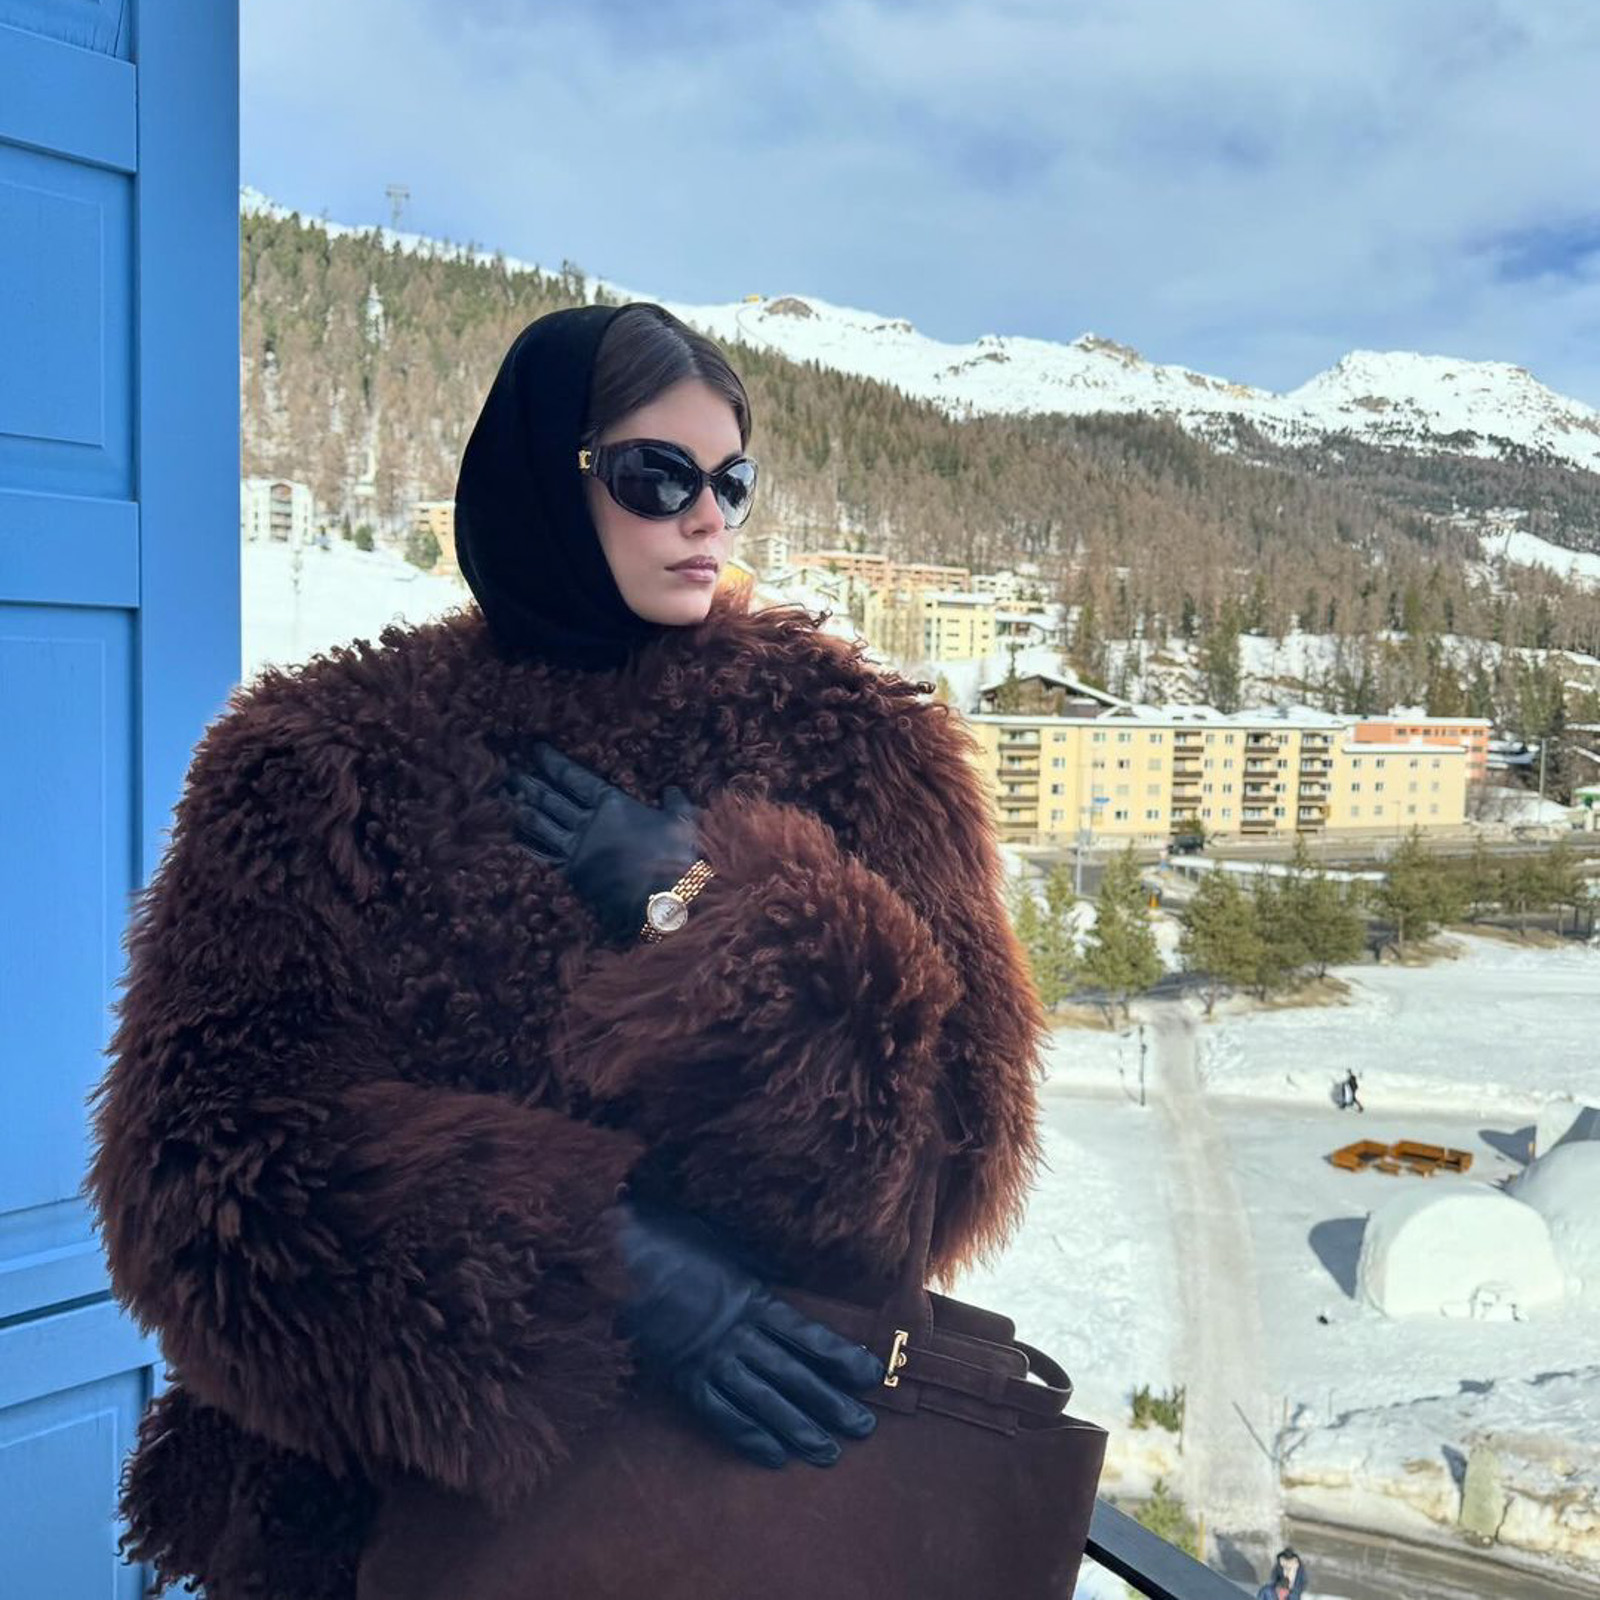 ad. 𝒿𝑒𝓃 𝒸𝑒𝓁𝒾𝓃𝑒  Skiing outfit, Winter fashion outfits